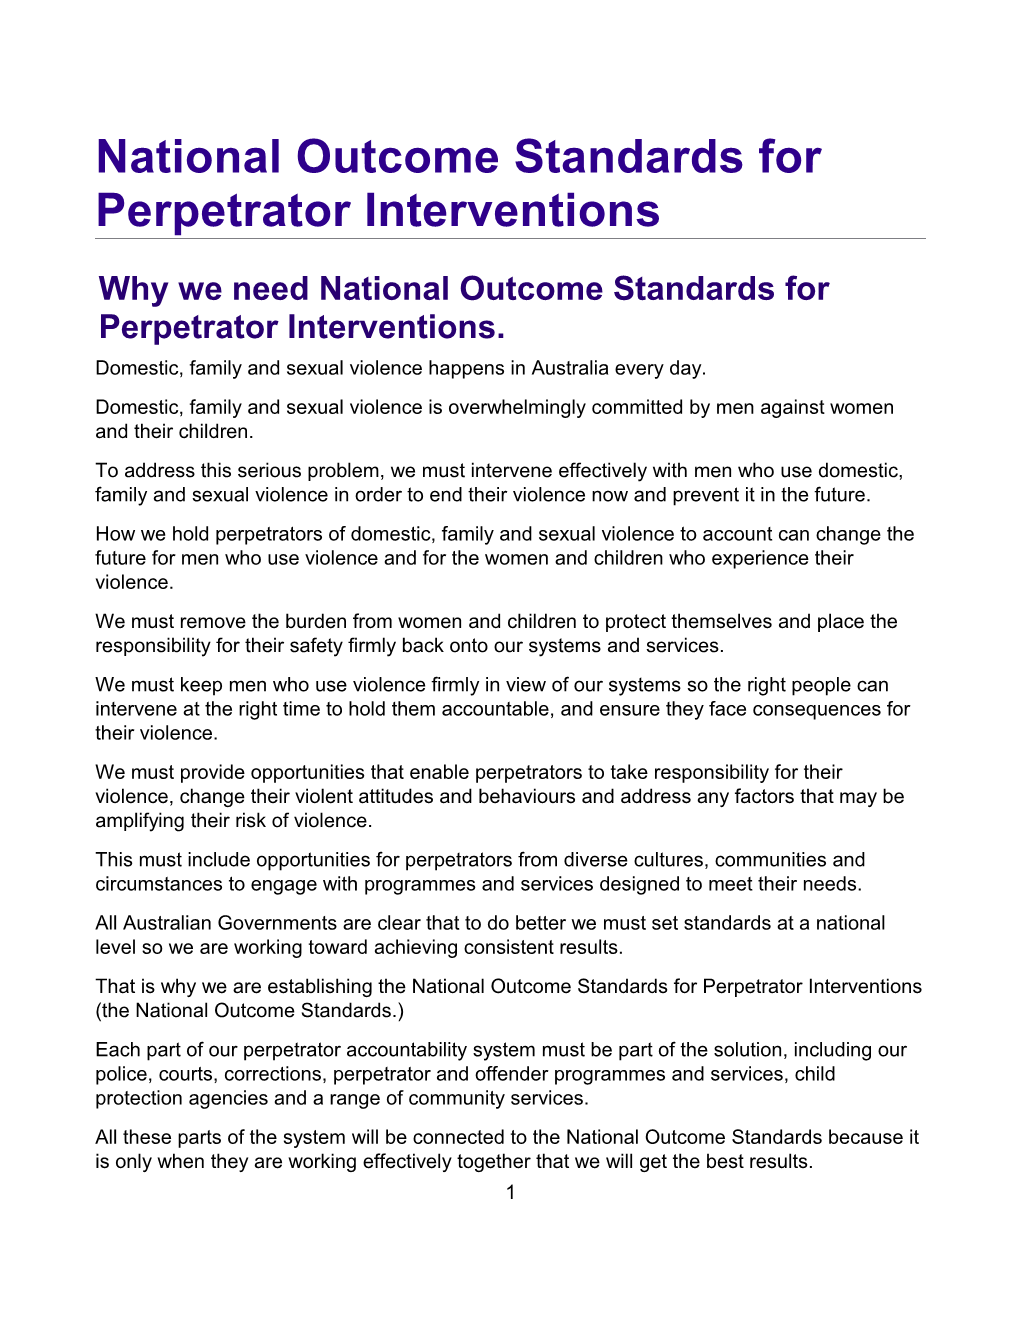 National Outcome Standards for Perpetrator Interventions